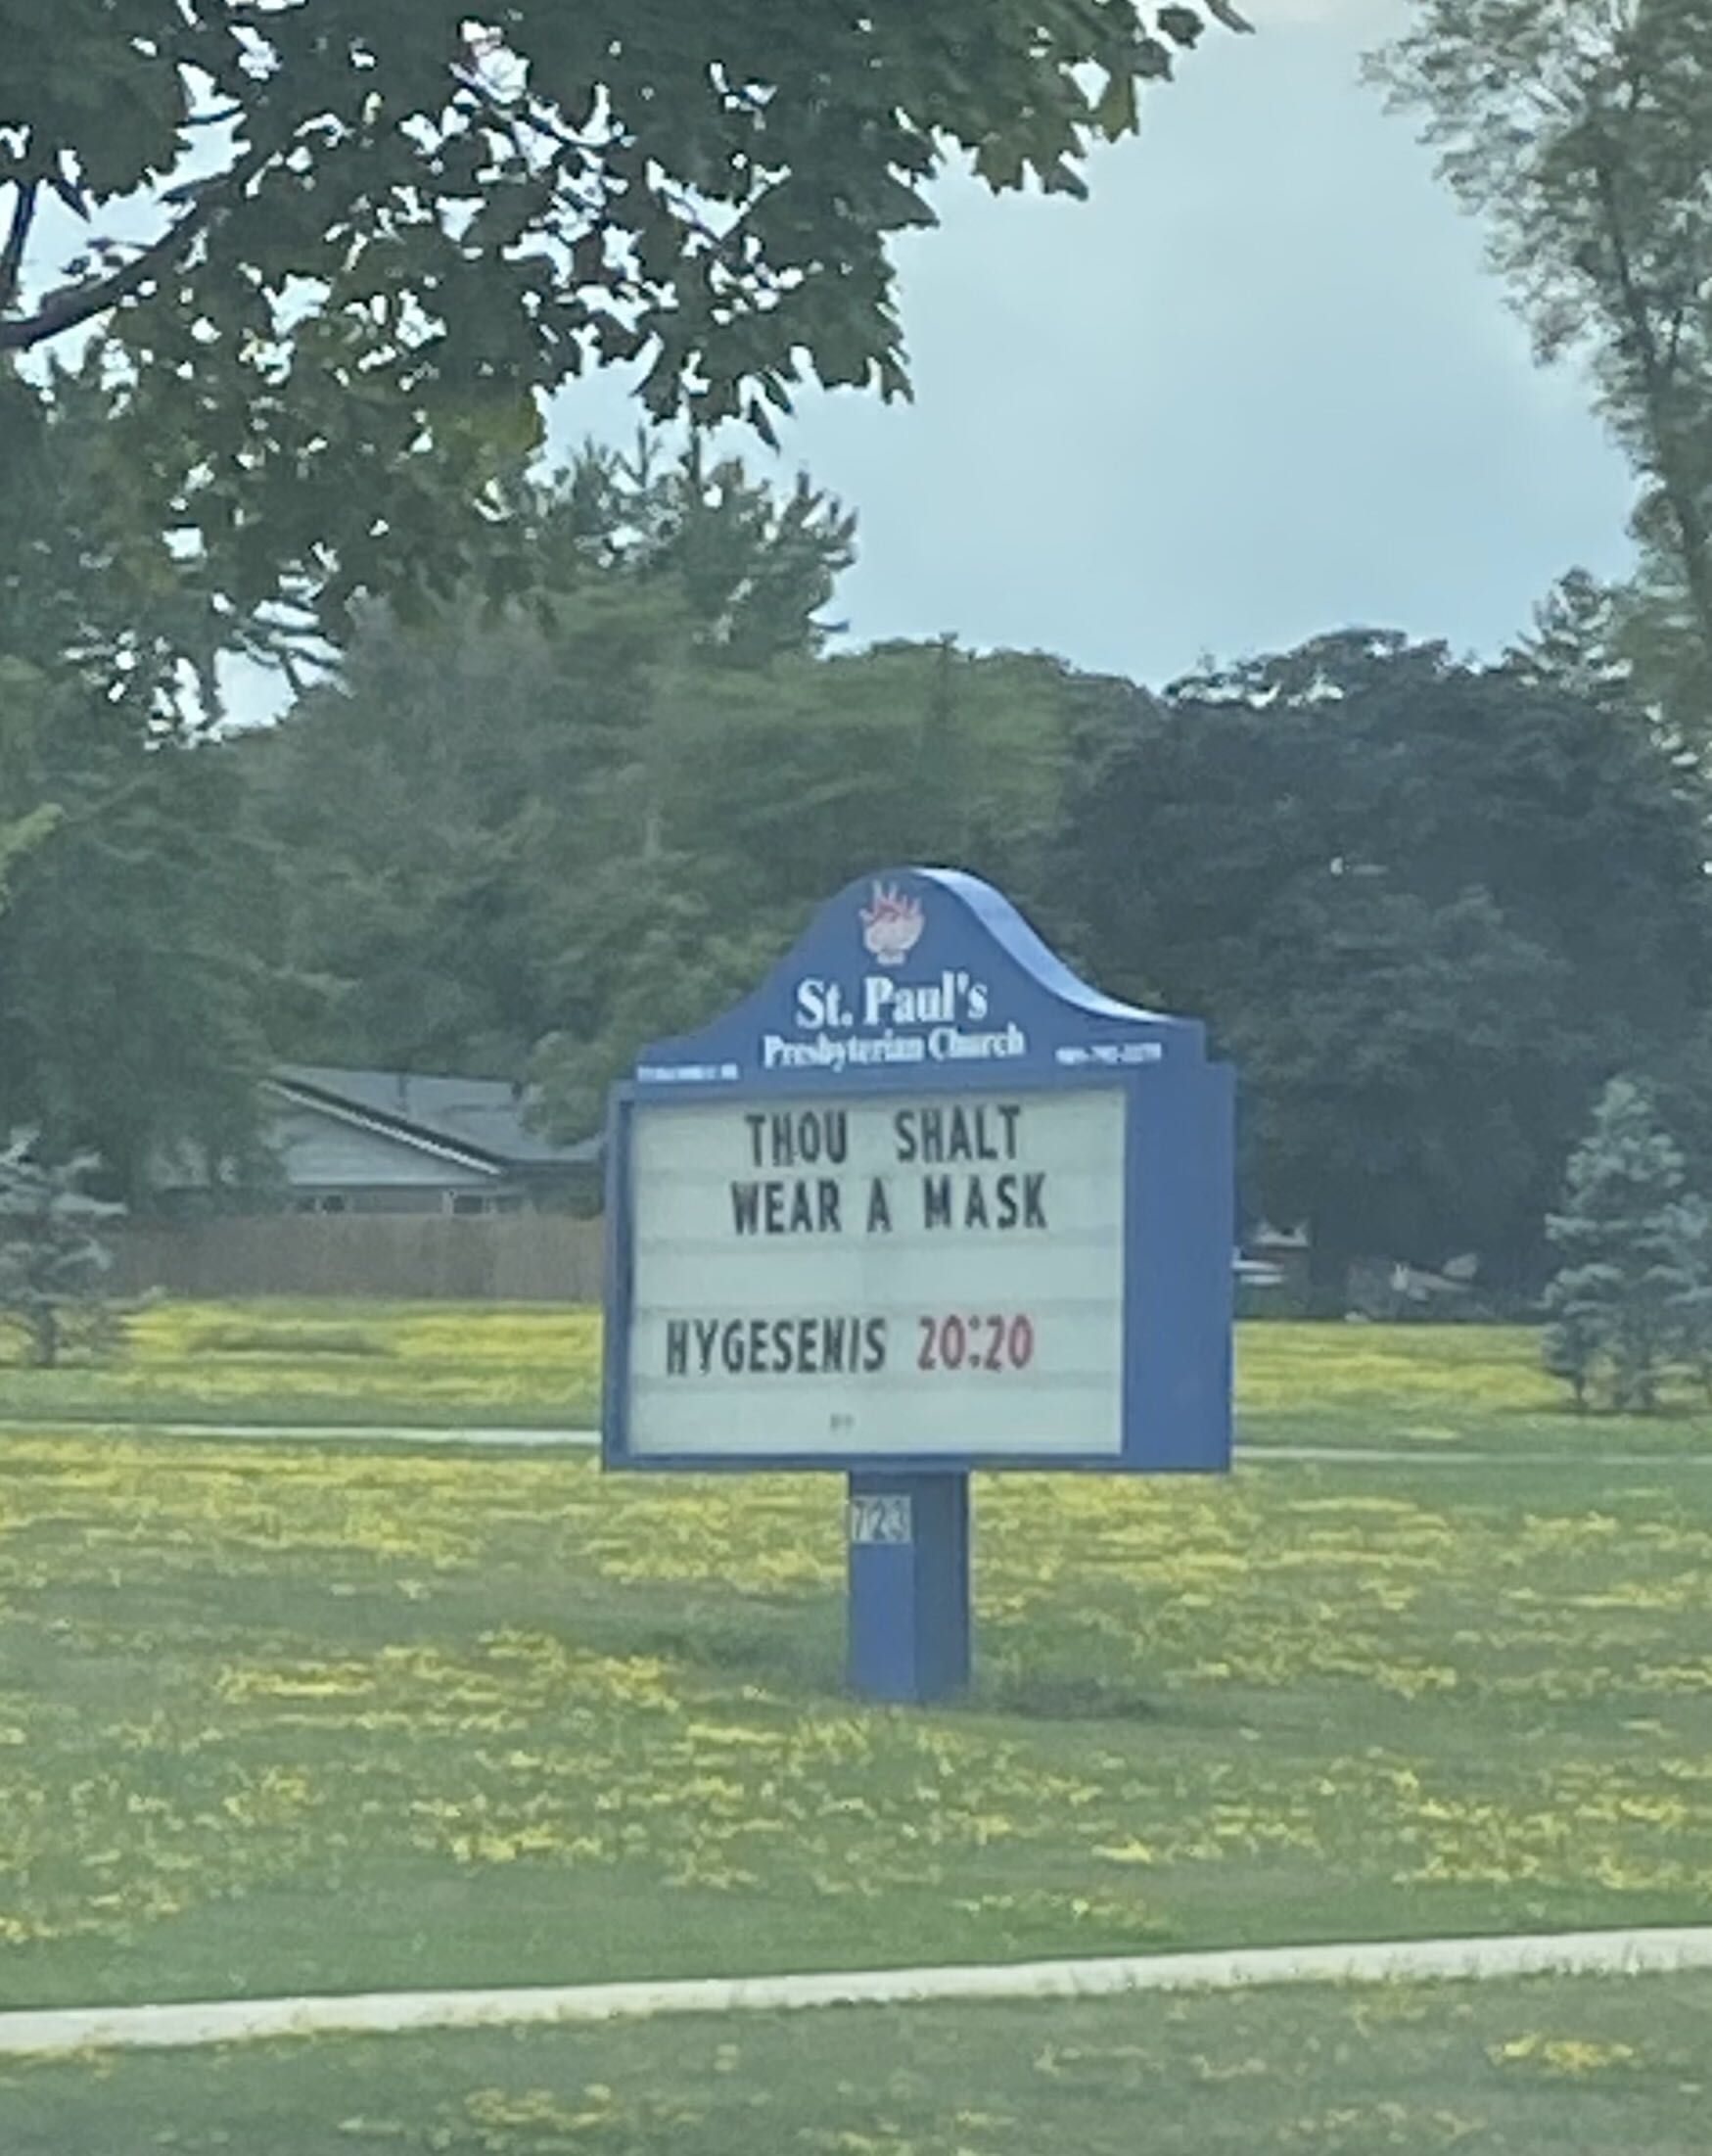 My local church put this up recently